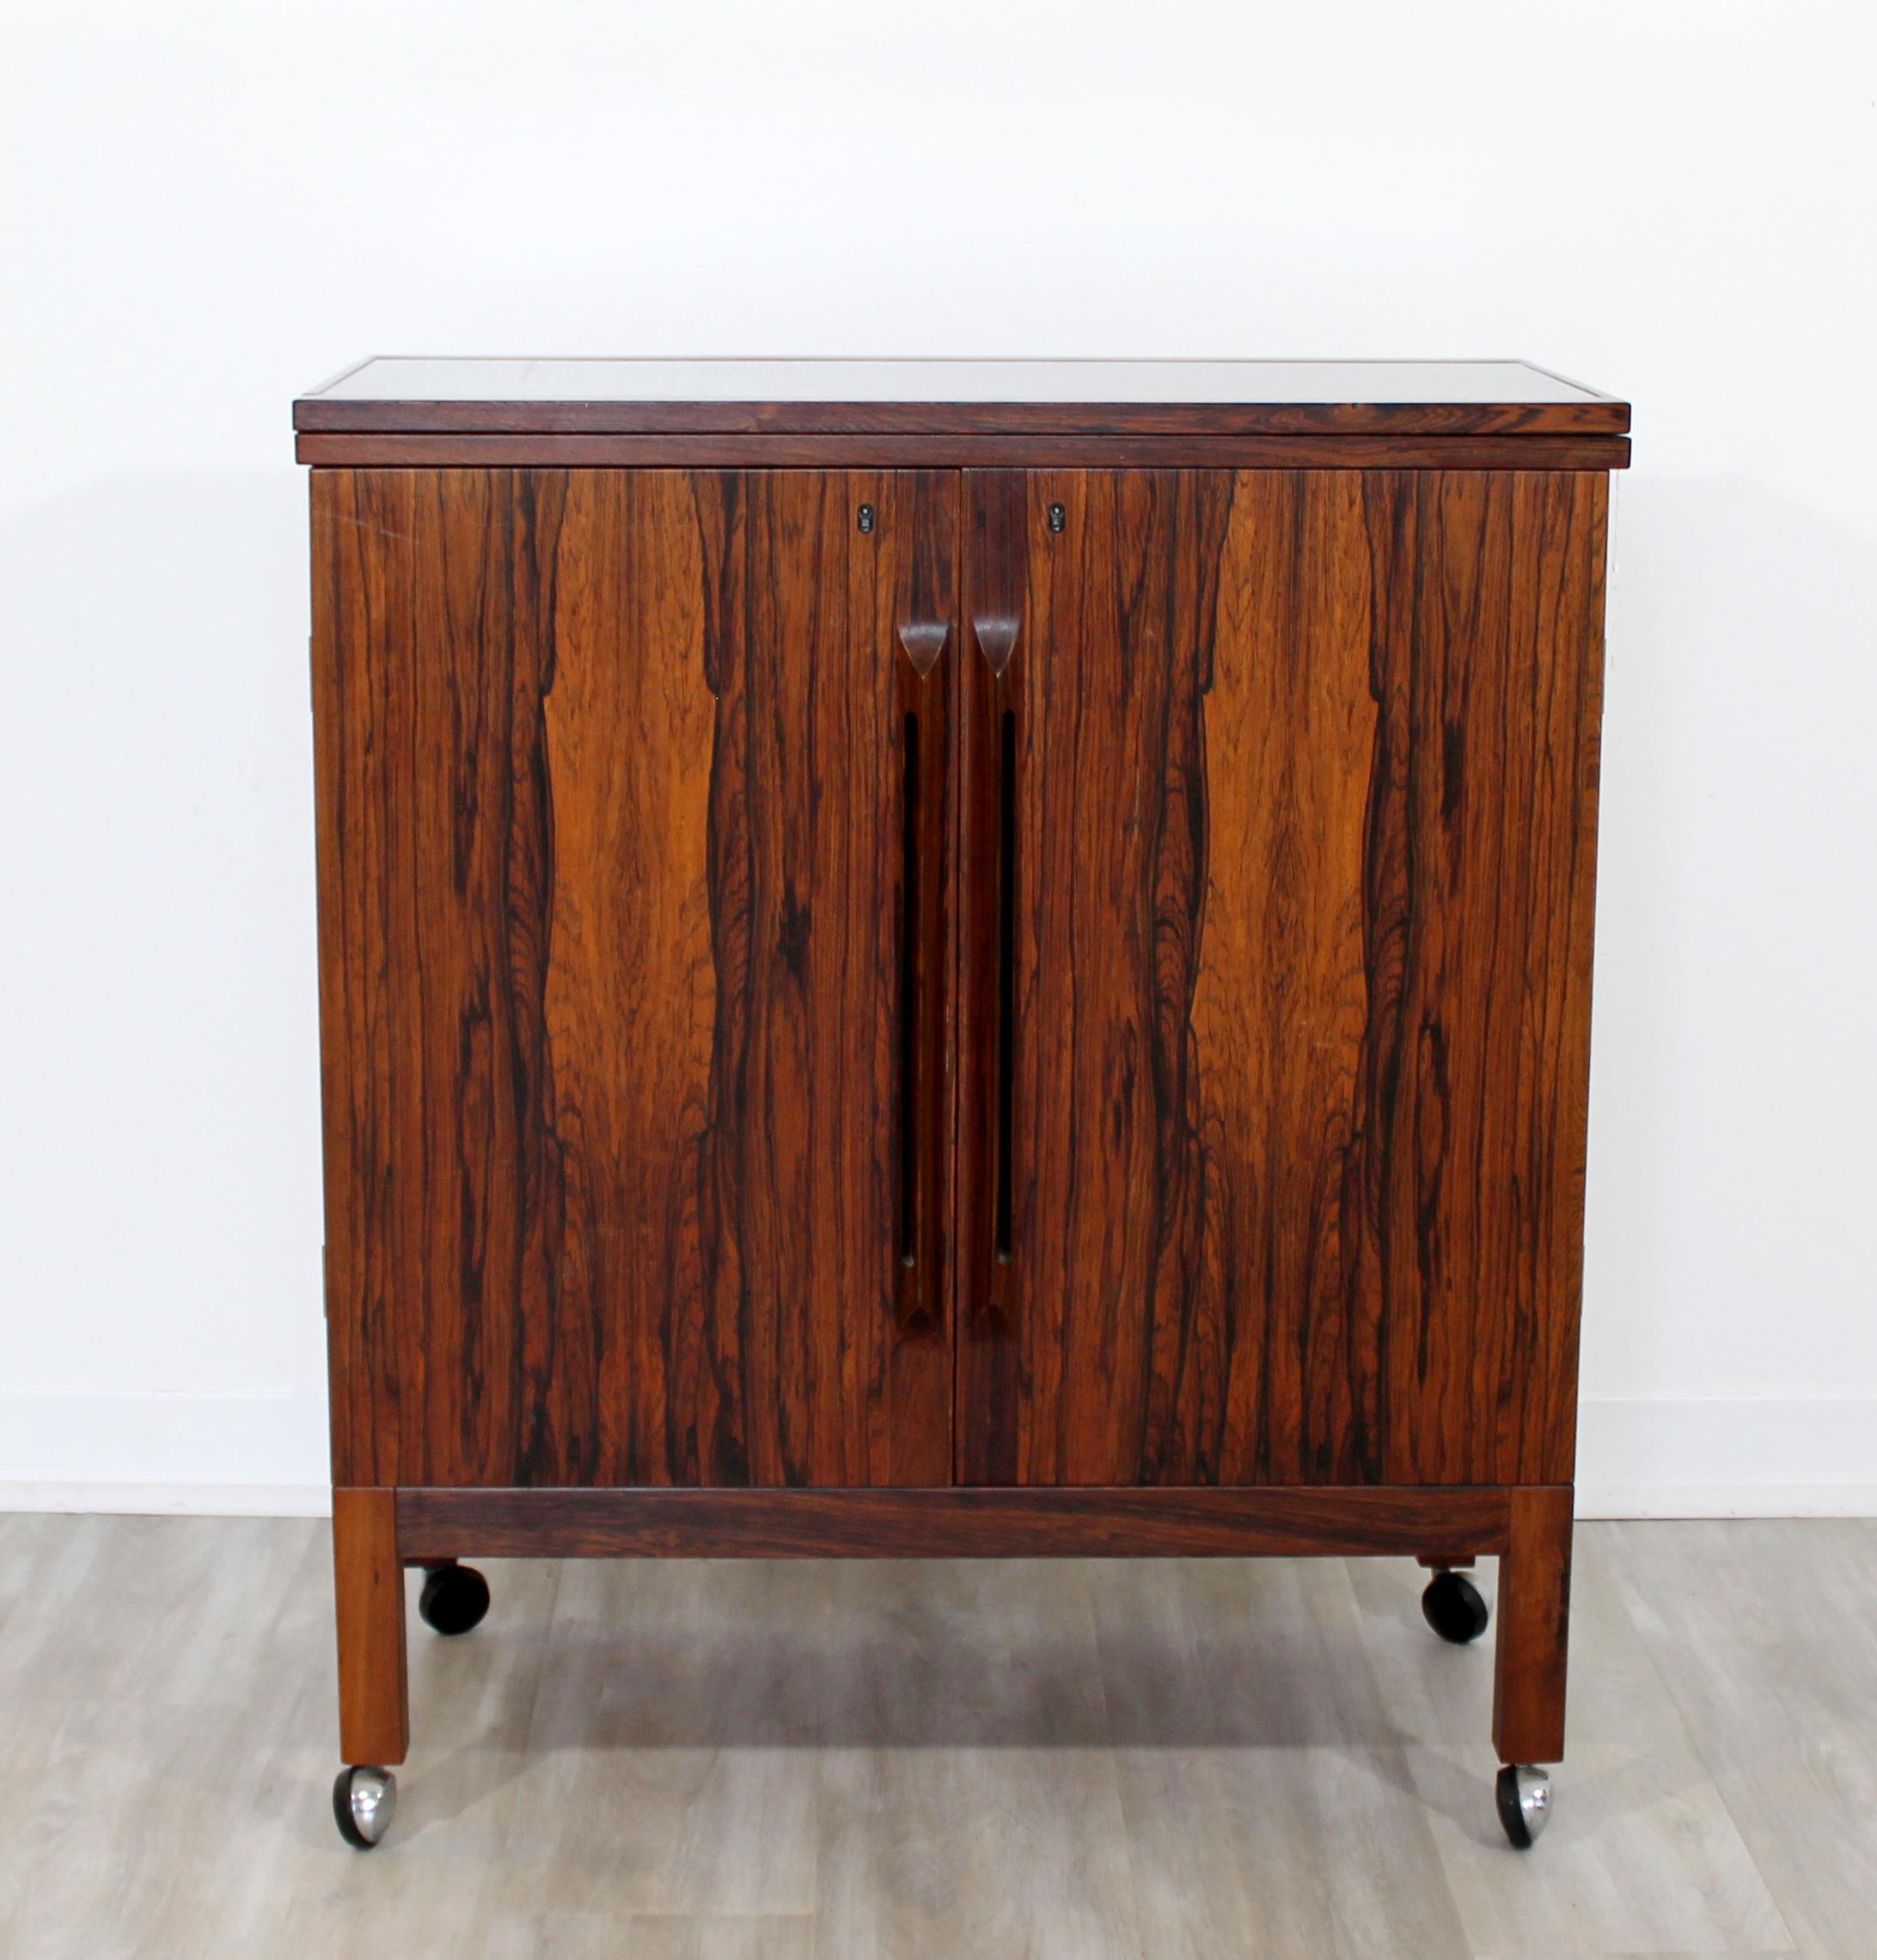 For your consideration is a magnificent, rosewood bar cart, with a black flip top, on casters, designed by Torbjorn Adfal, circa the 1960s. In excellent condition. The dimensions are 30